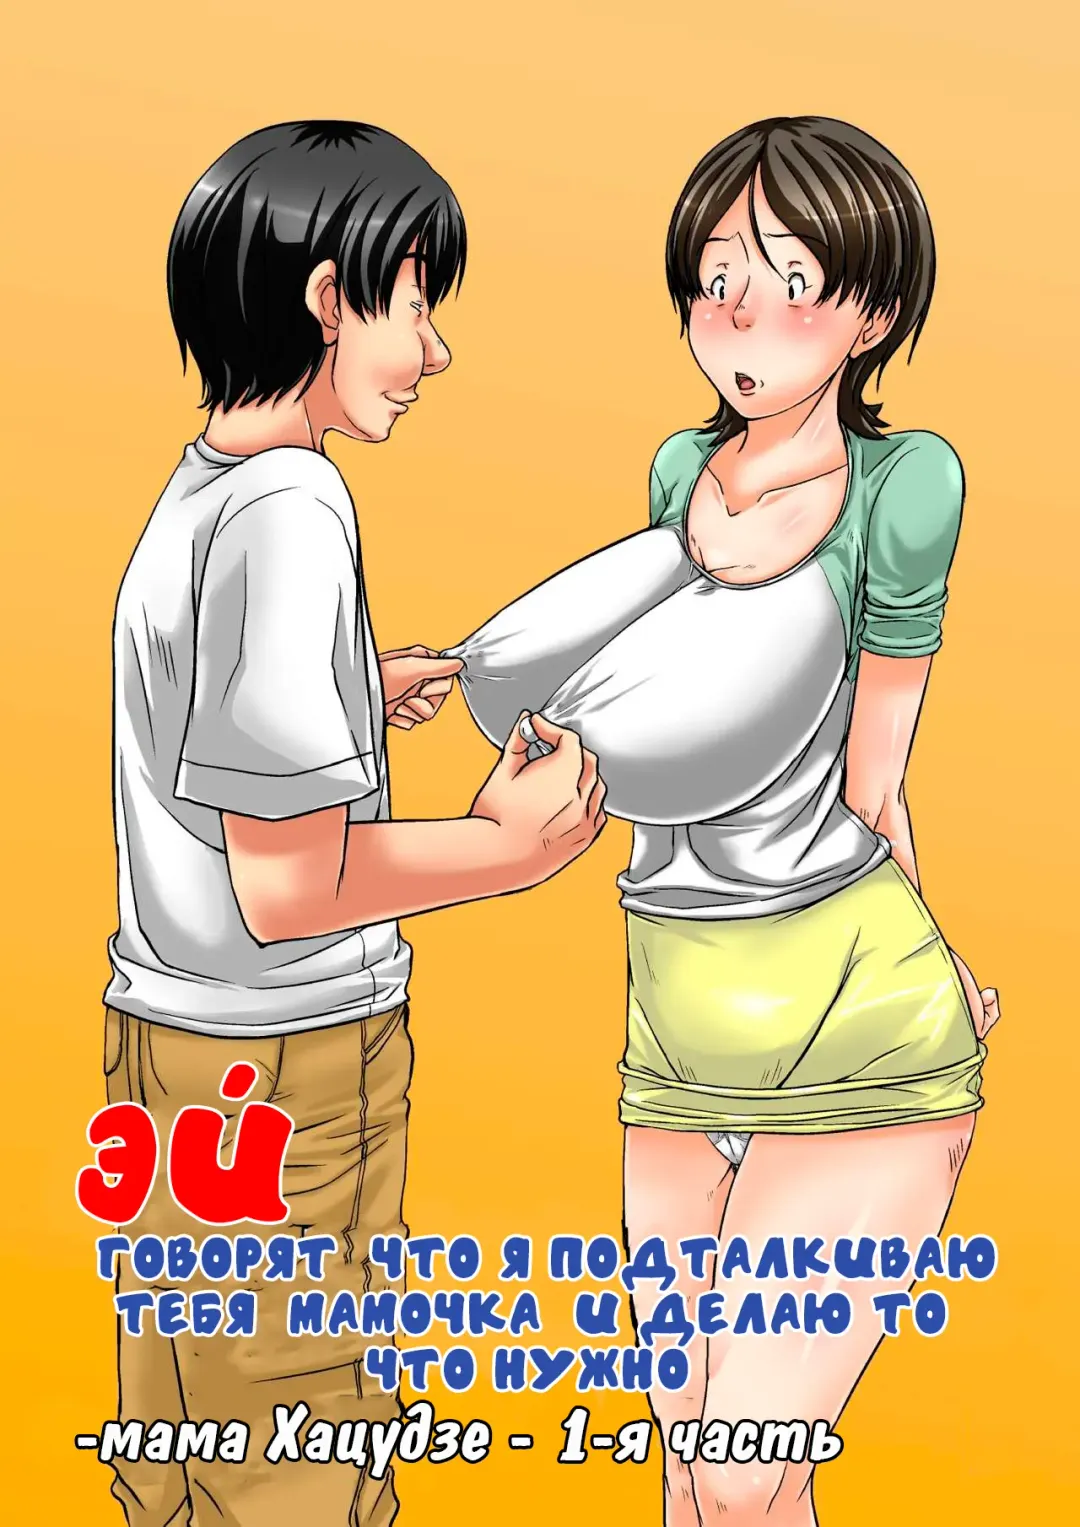 Read [Hoyoyo] Hey! It is said that I urge you mother and will do what! ... mother Hatsujou - 1st part - Fhentai.net